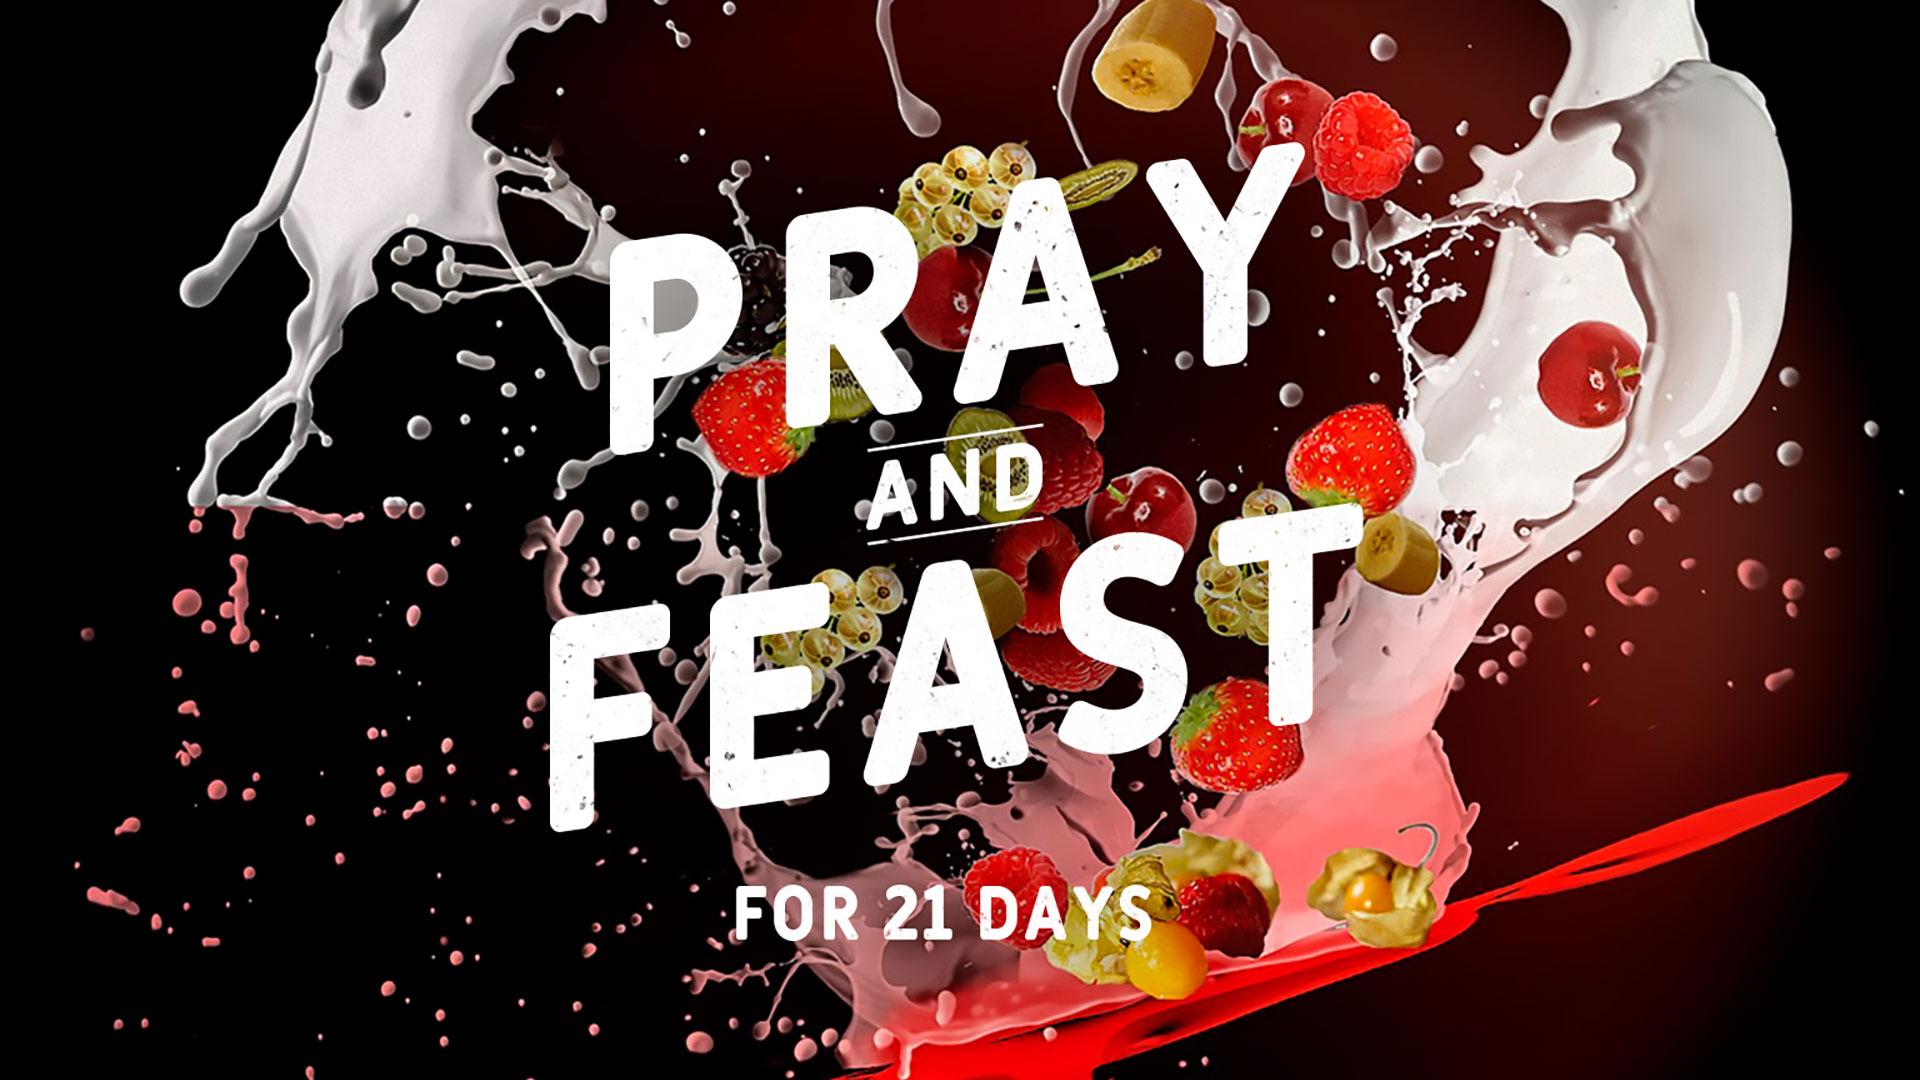 Featured Image for “Pray and Feast For 21 Days"